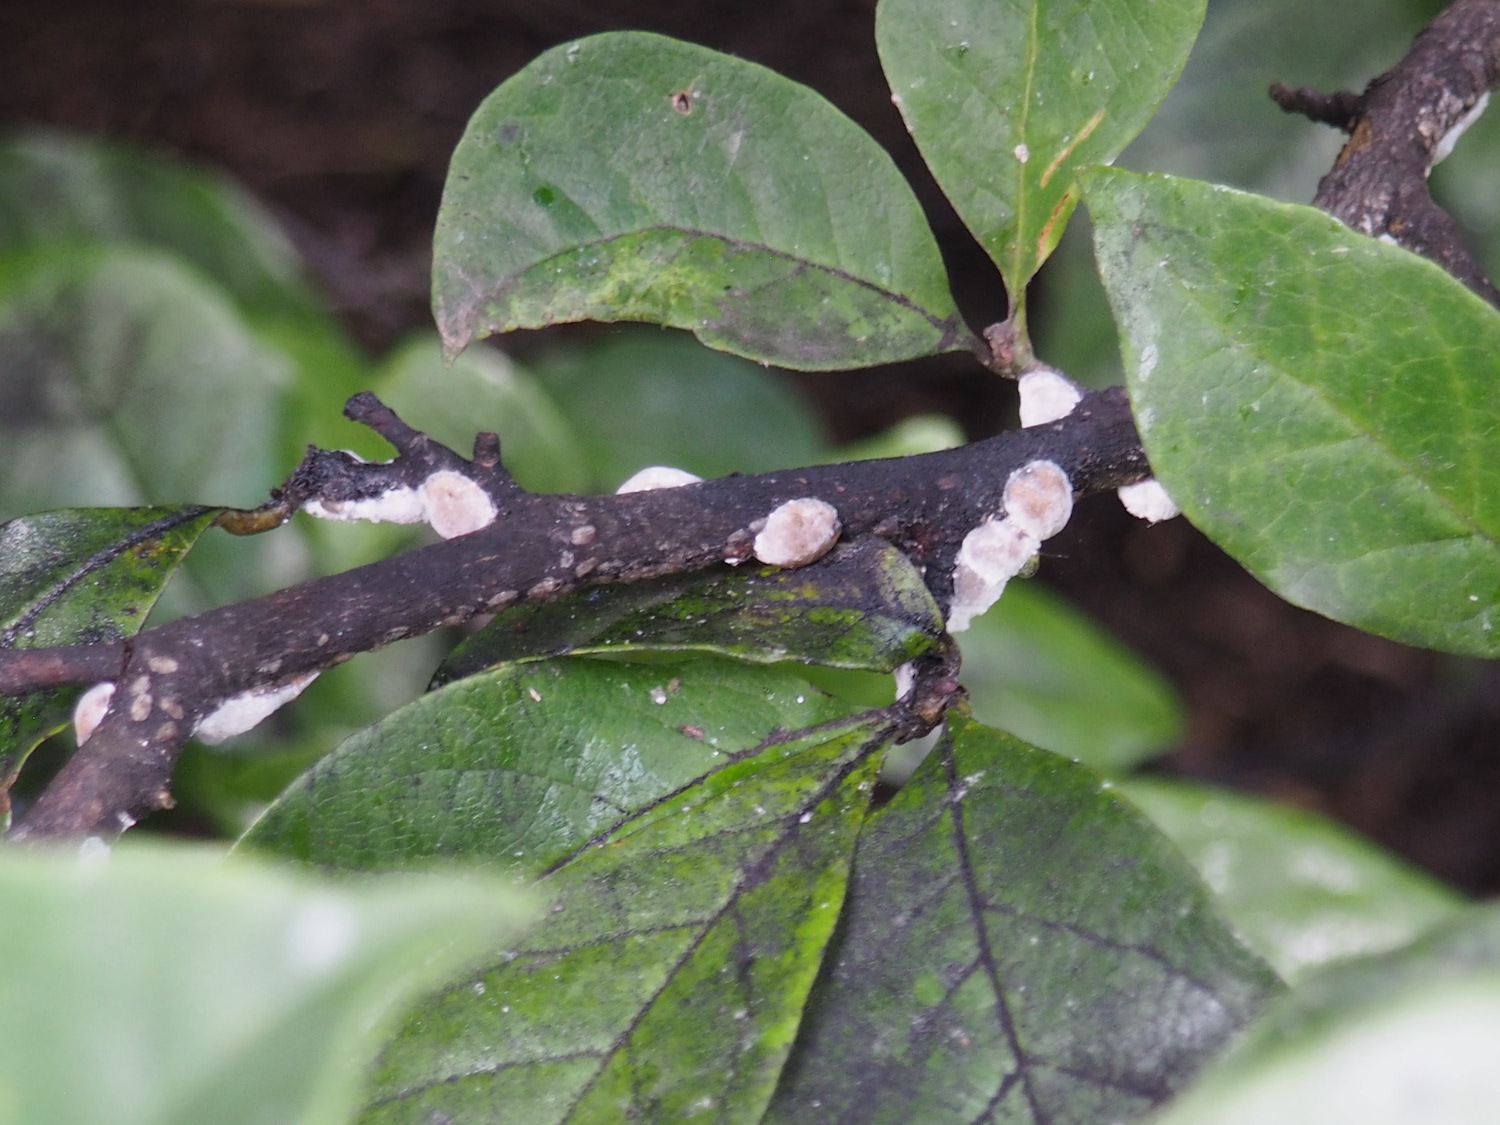 magnolia scale nymphs